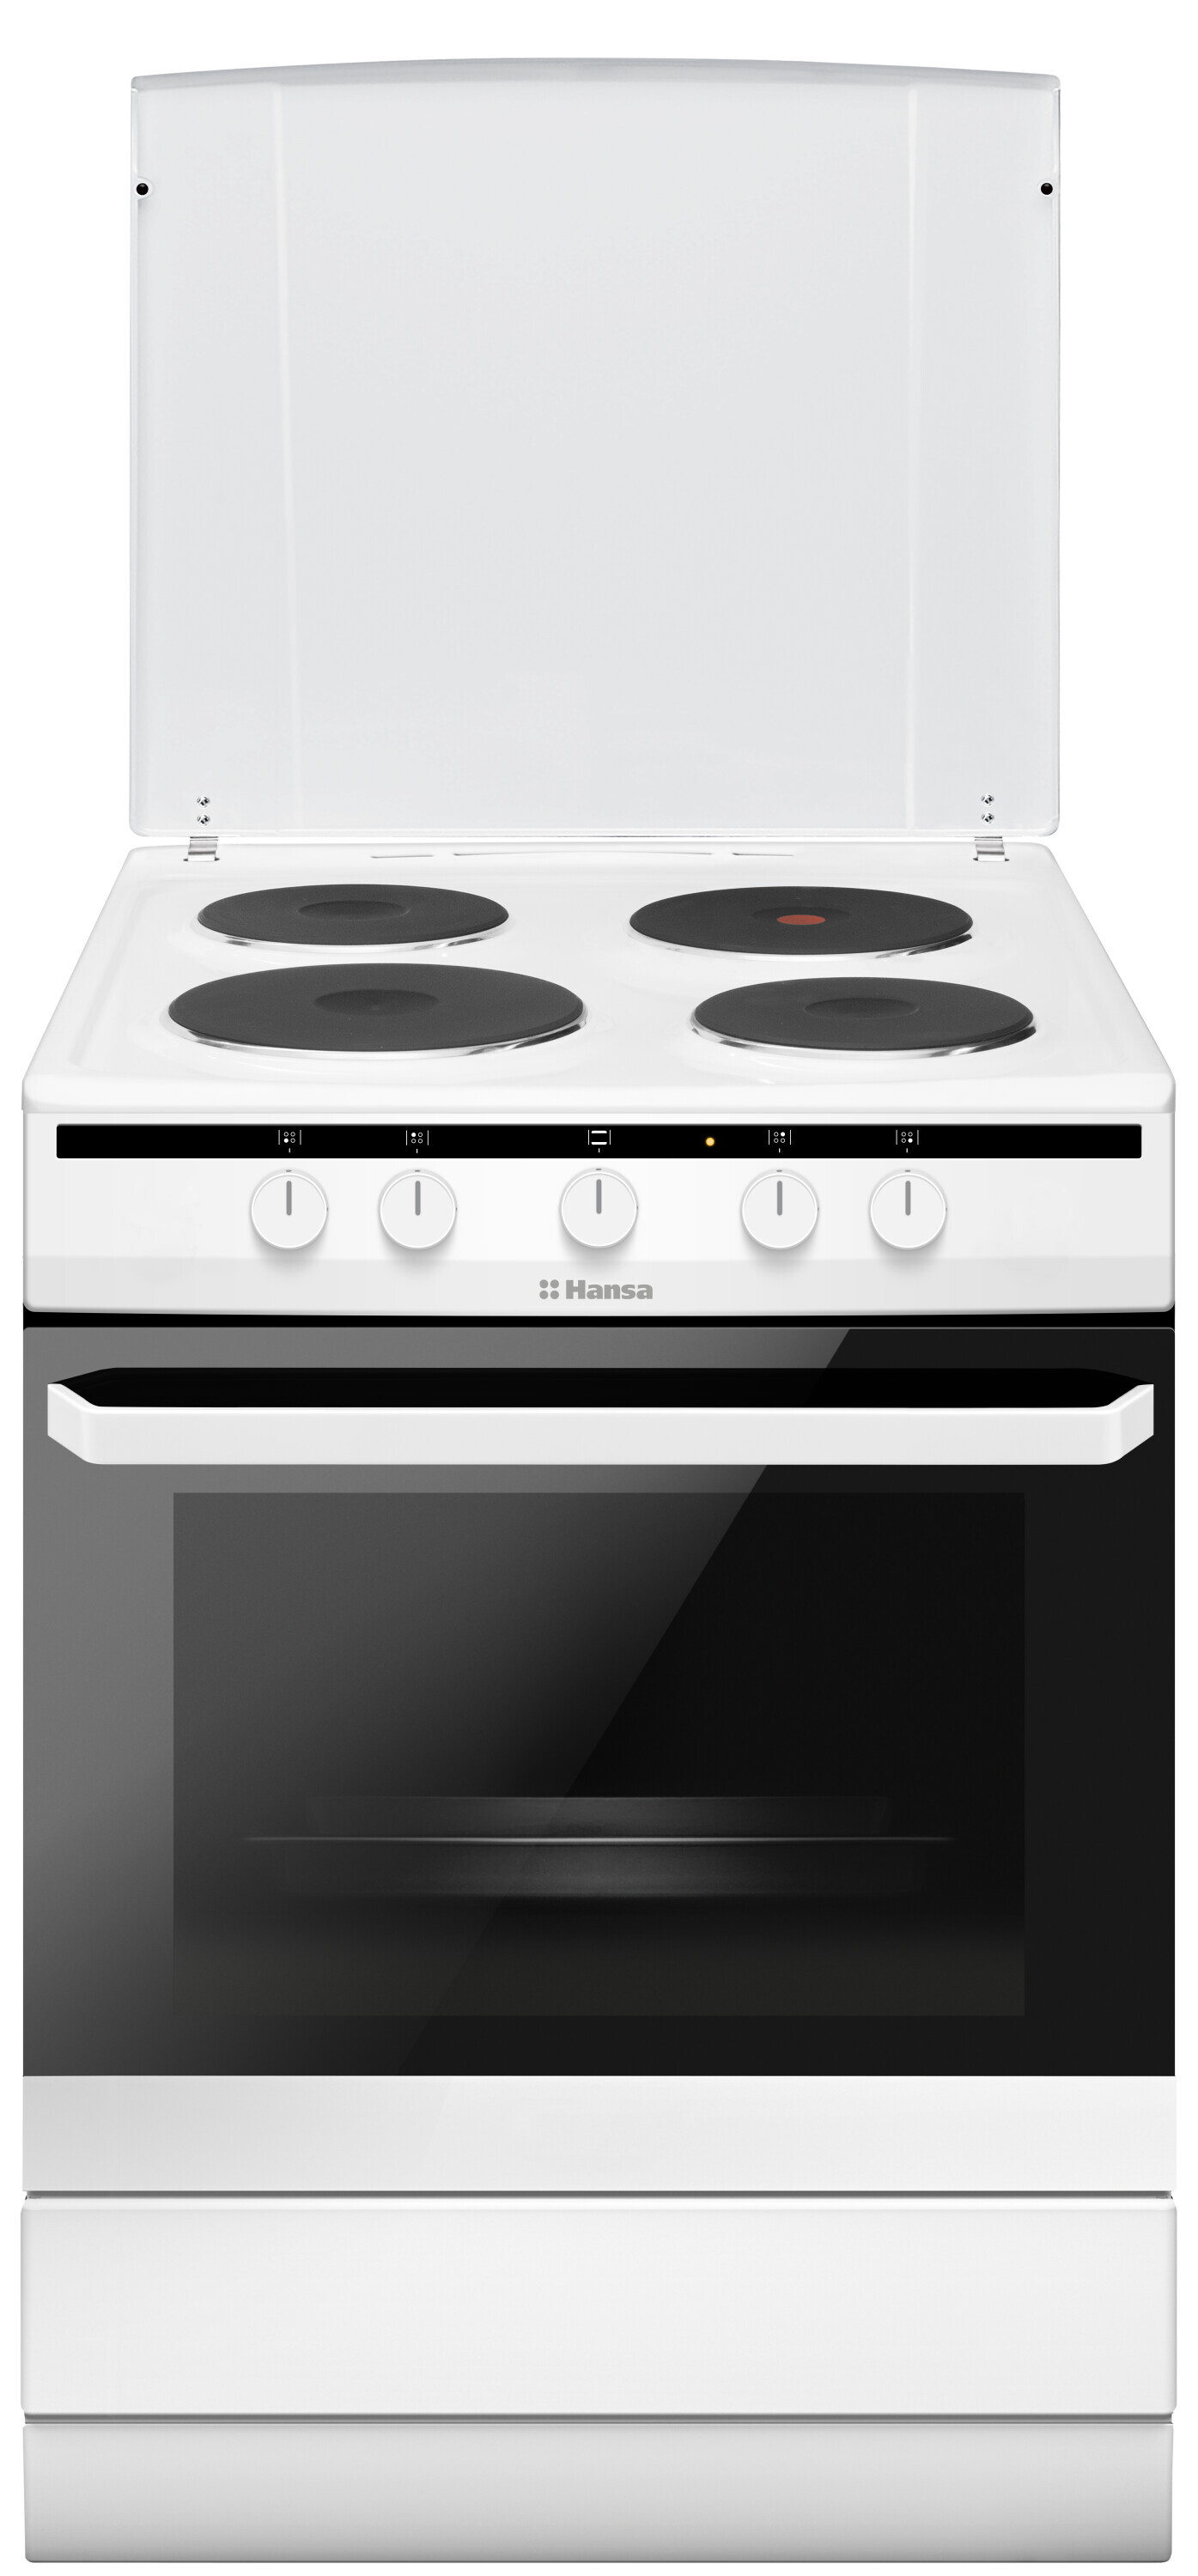 Freestanding cooker with electric hob